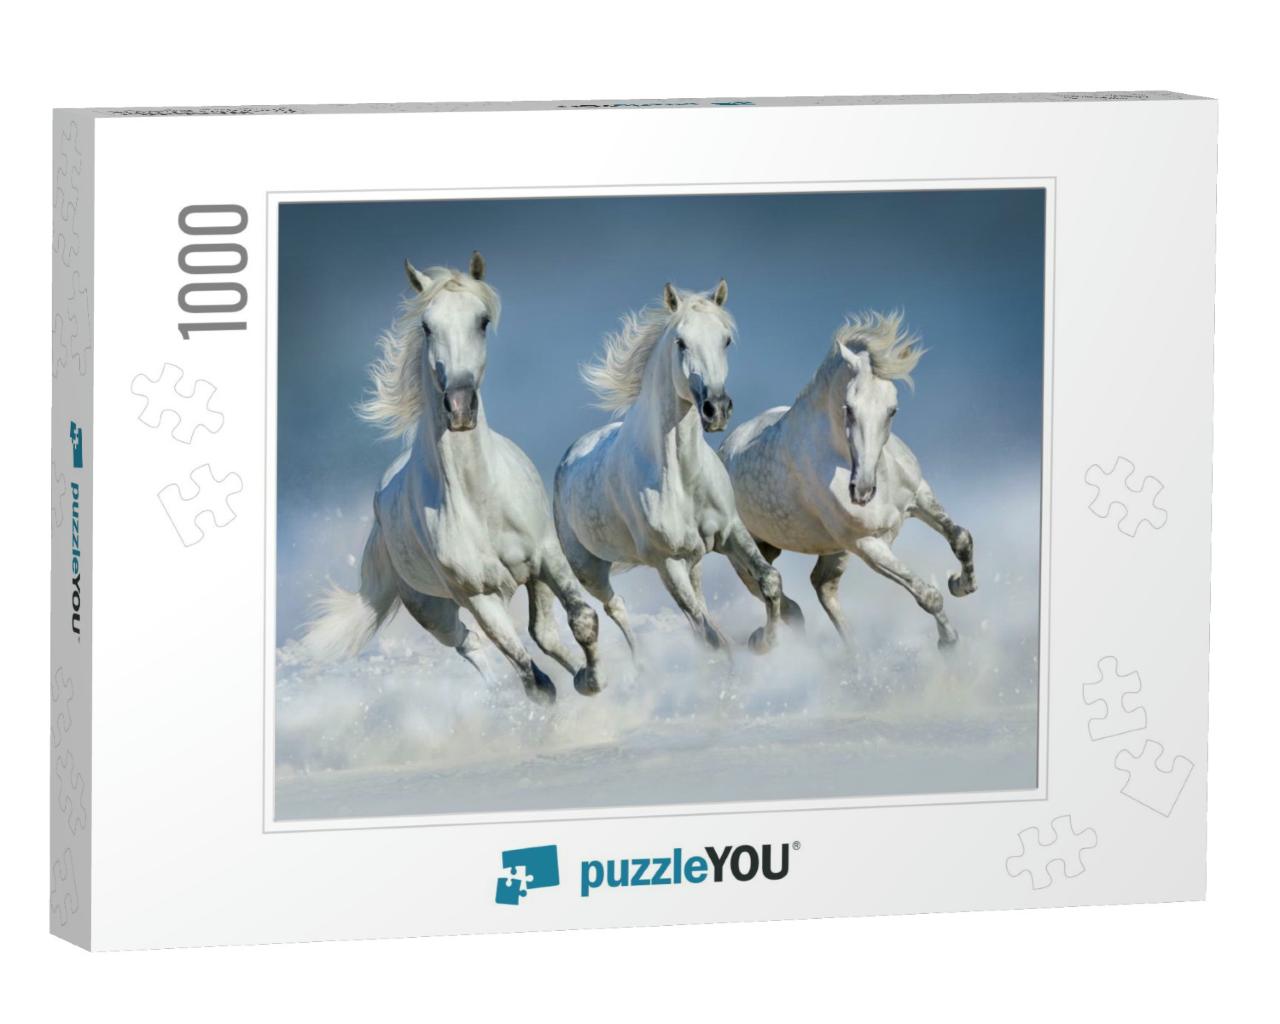 Group of Beautiful Arabian Horses Run Gallop in Snow Wint... Jigsaw Puzzle with 1000 pieces